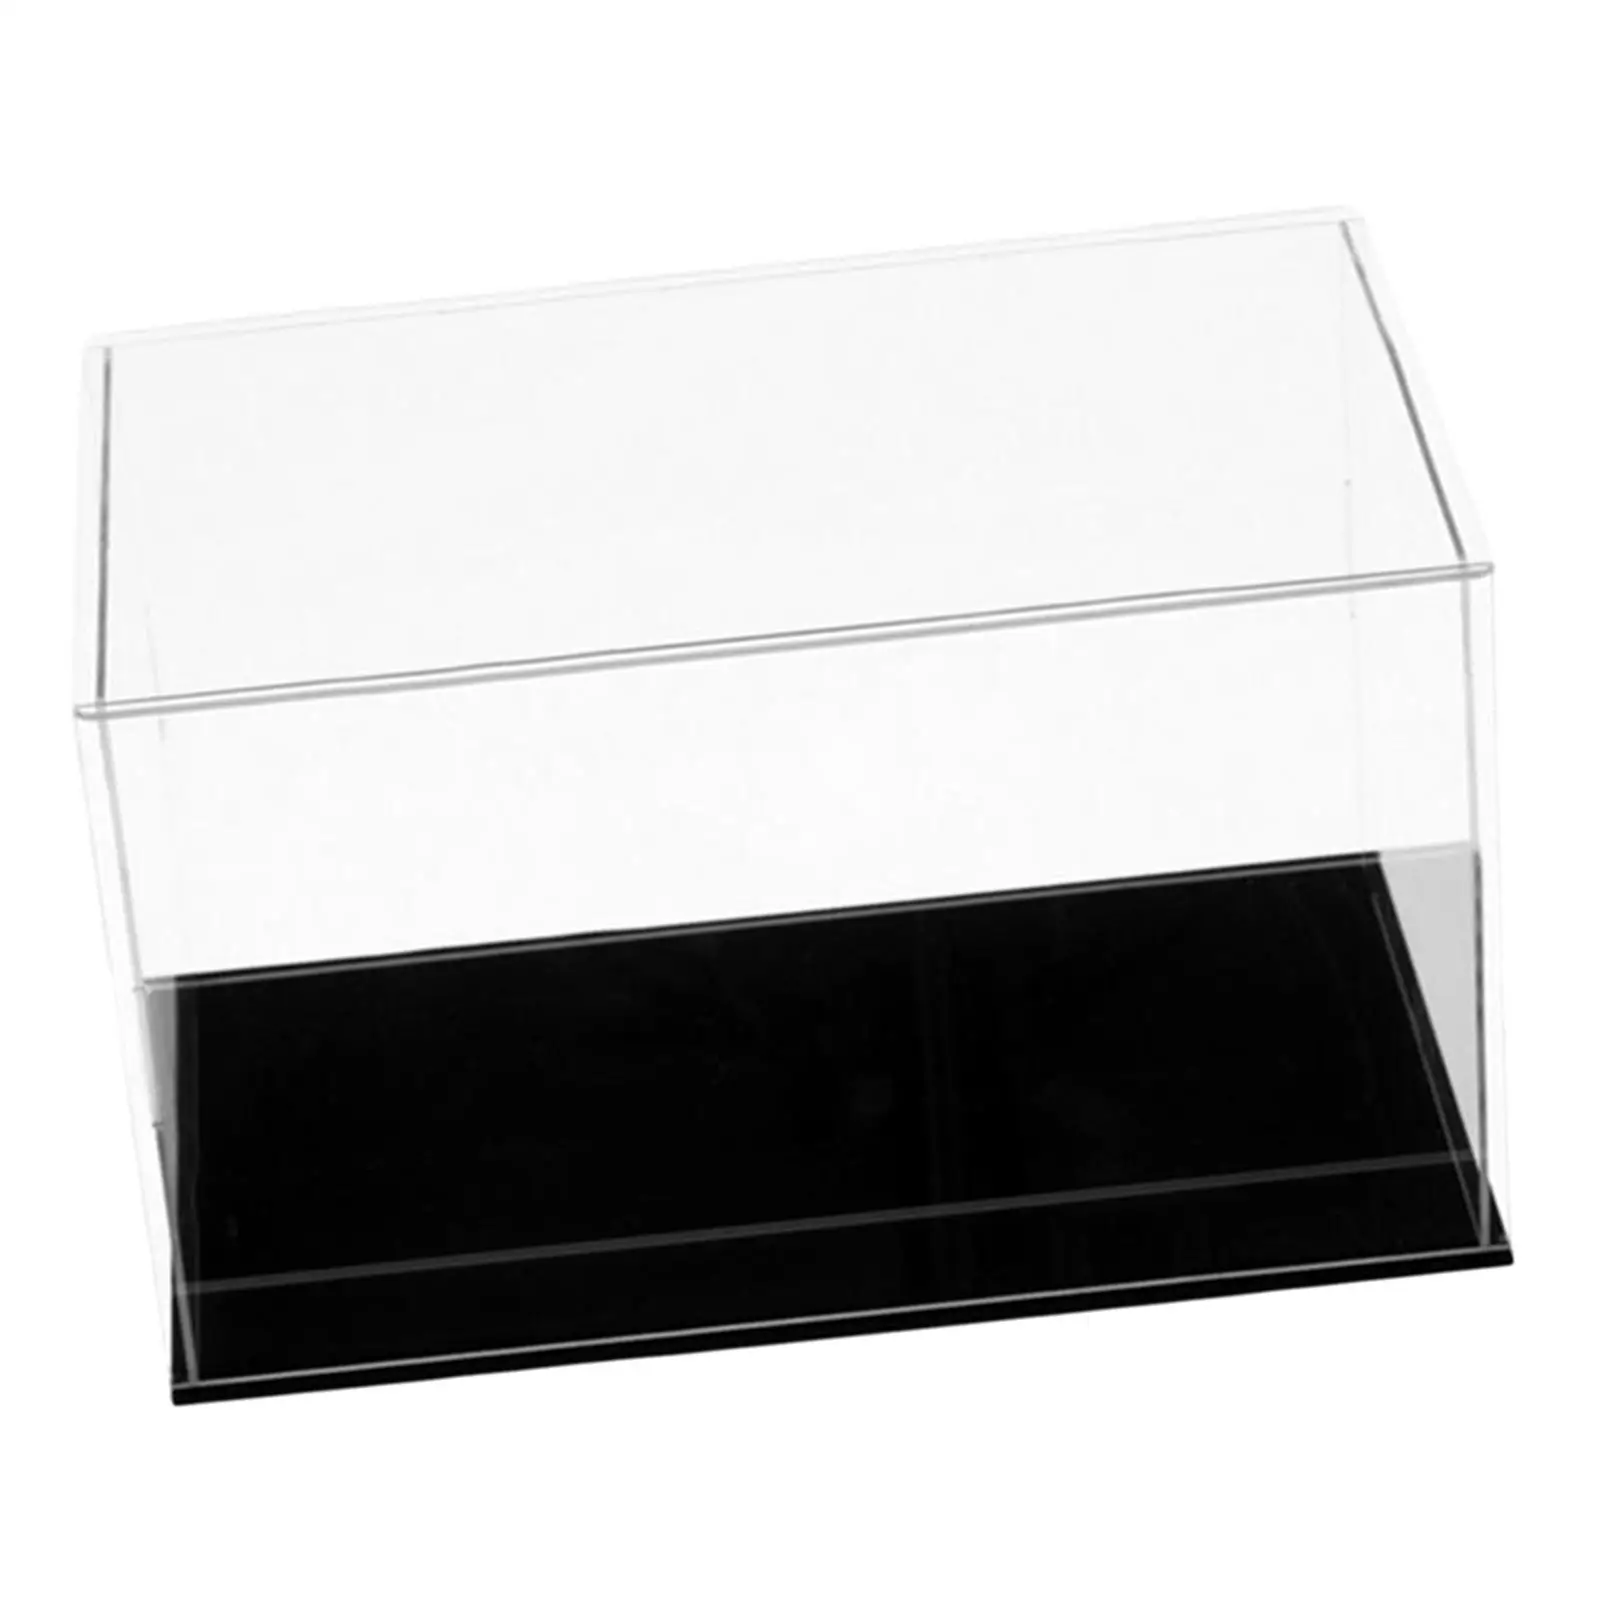 Acrylic Display Case Transparent for Plane Model Diecast Cars Model Dolls